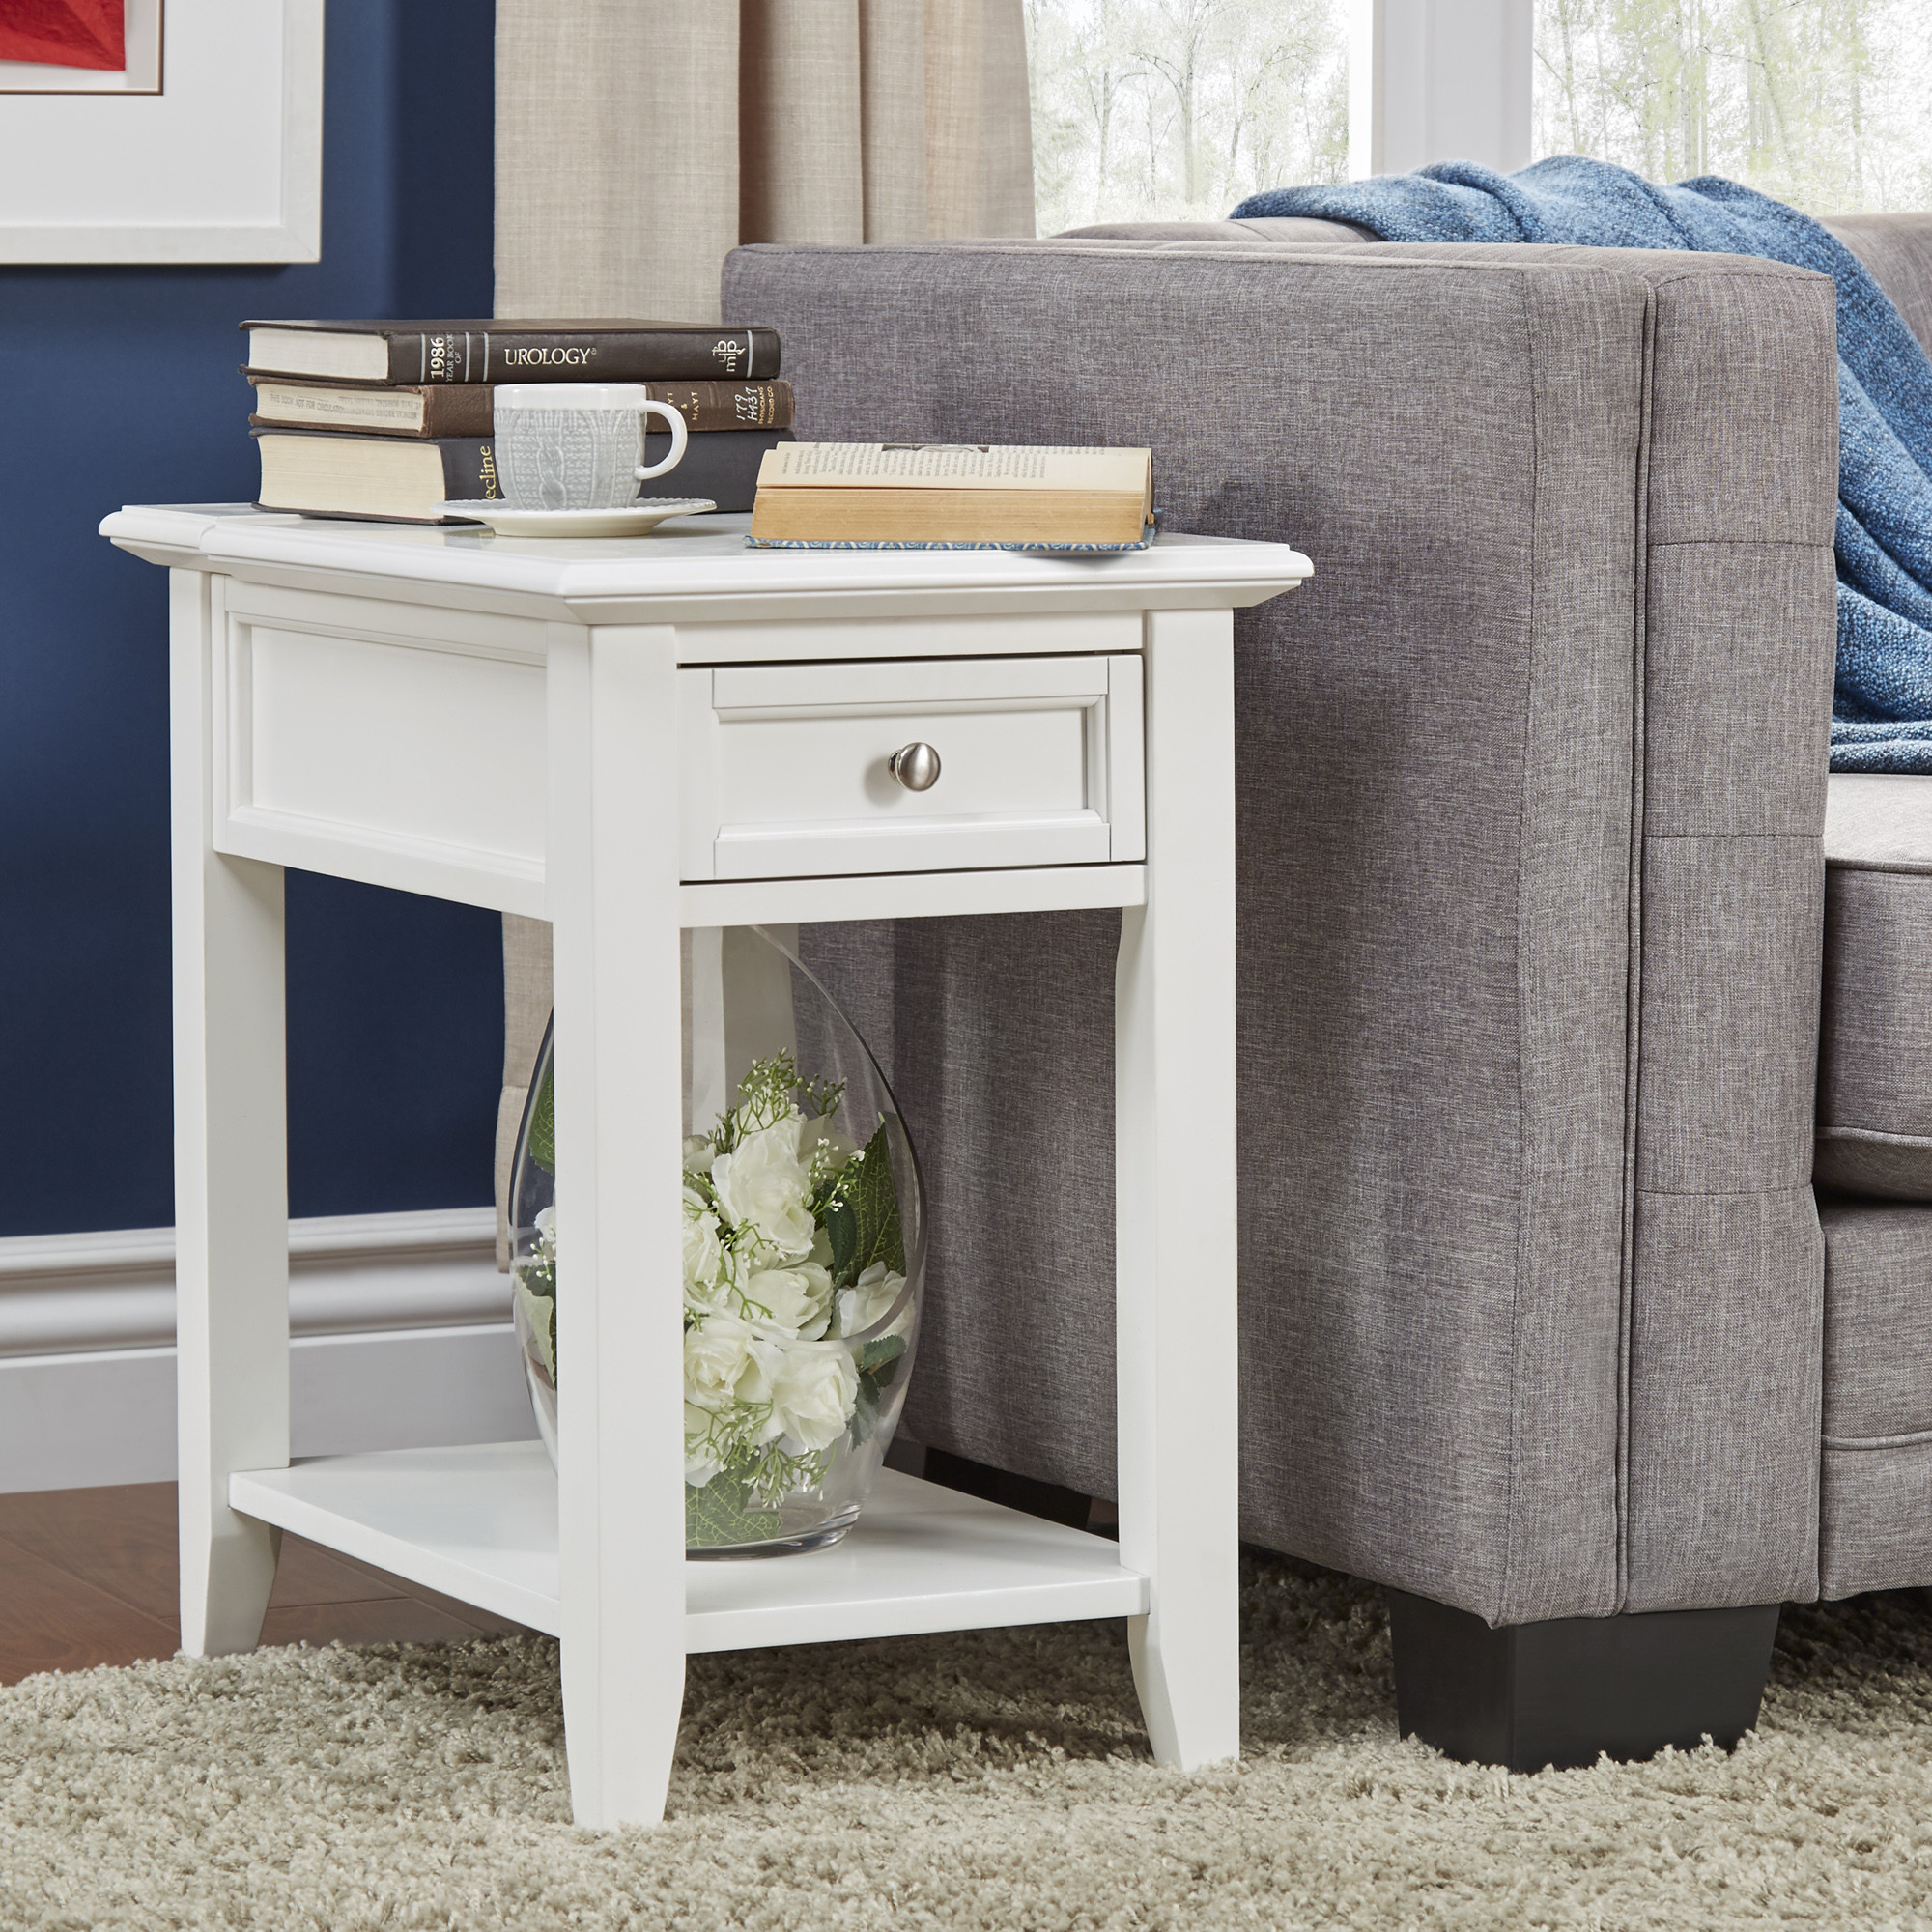 Side Table For Living Room
 Oxford Creek Ellason Charging Accent Table in White Home